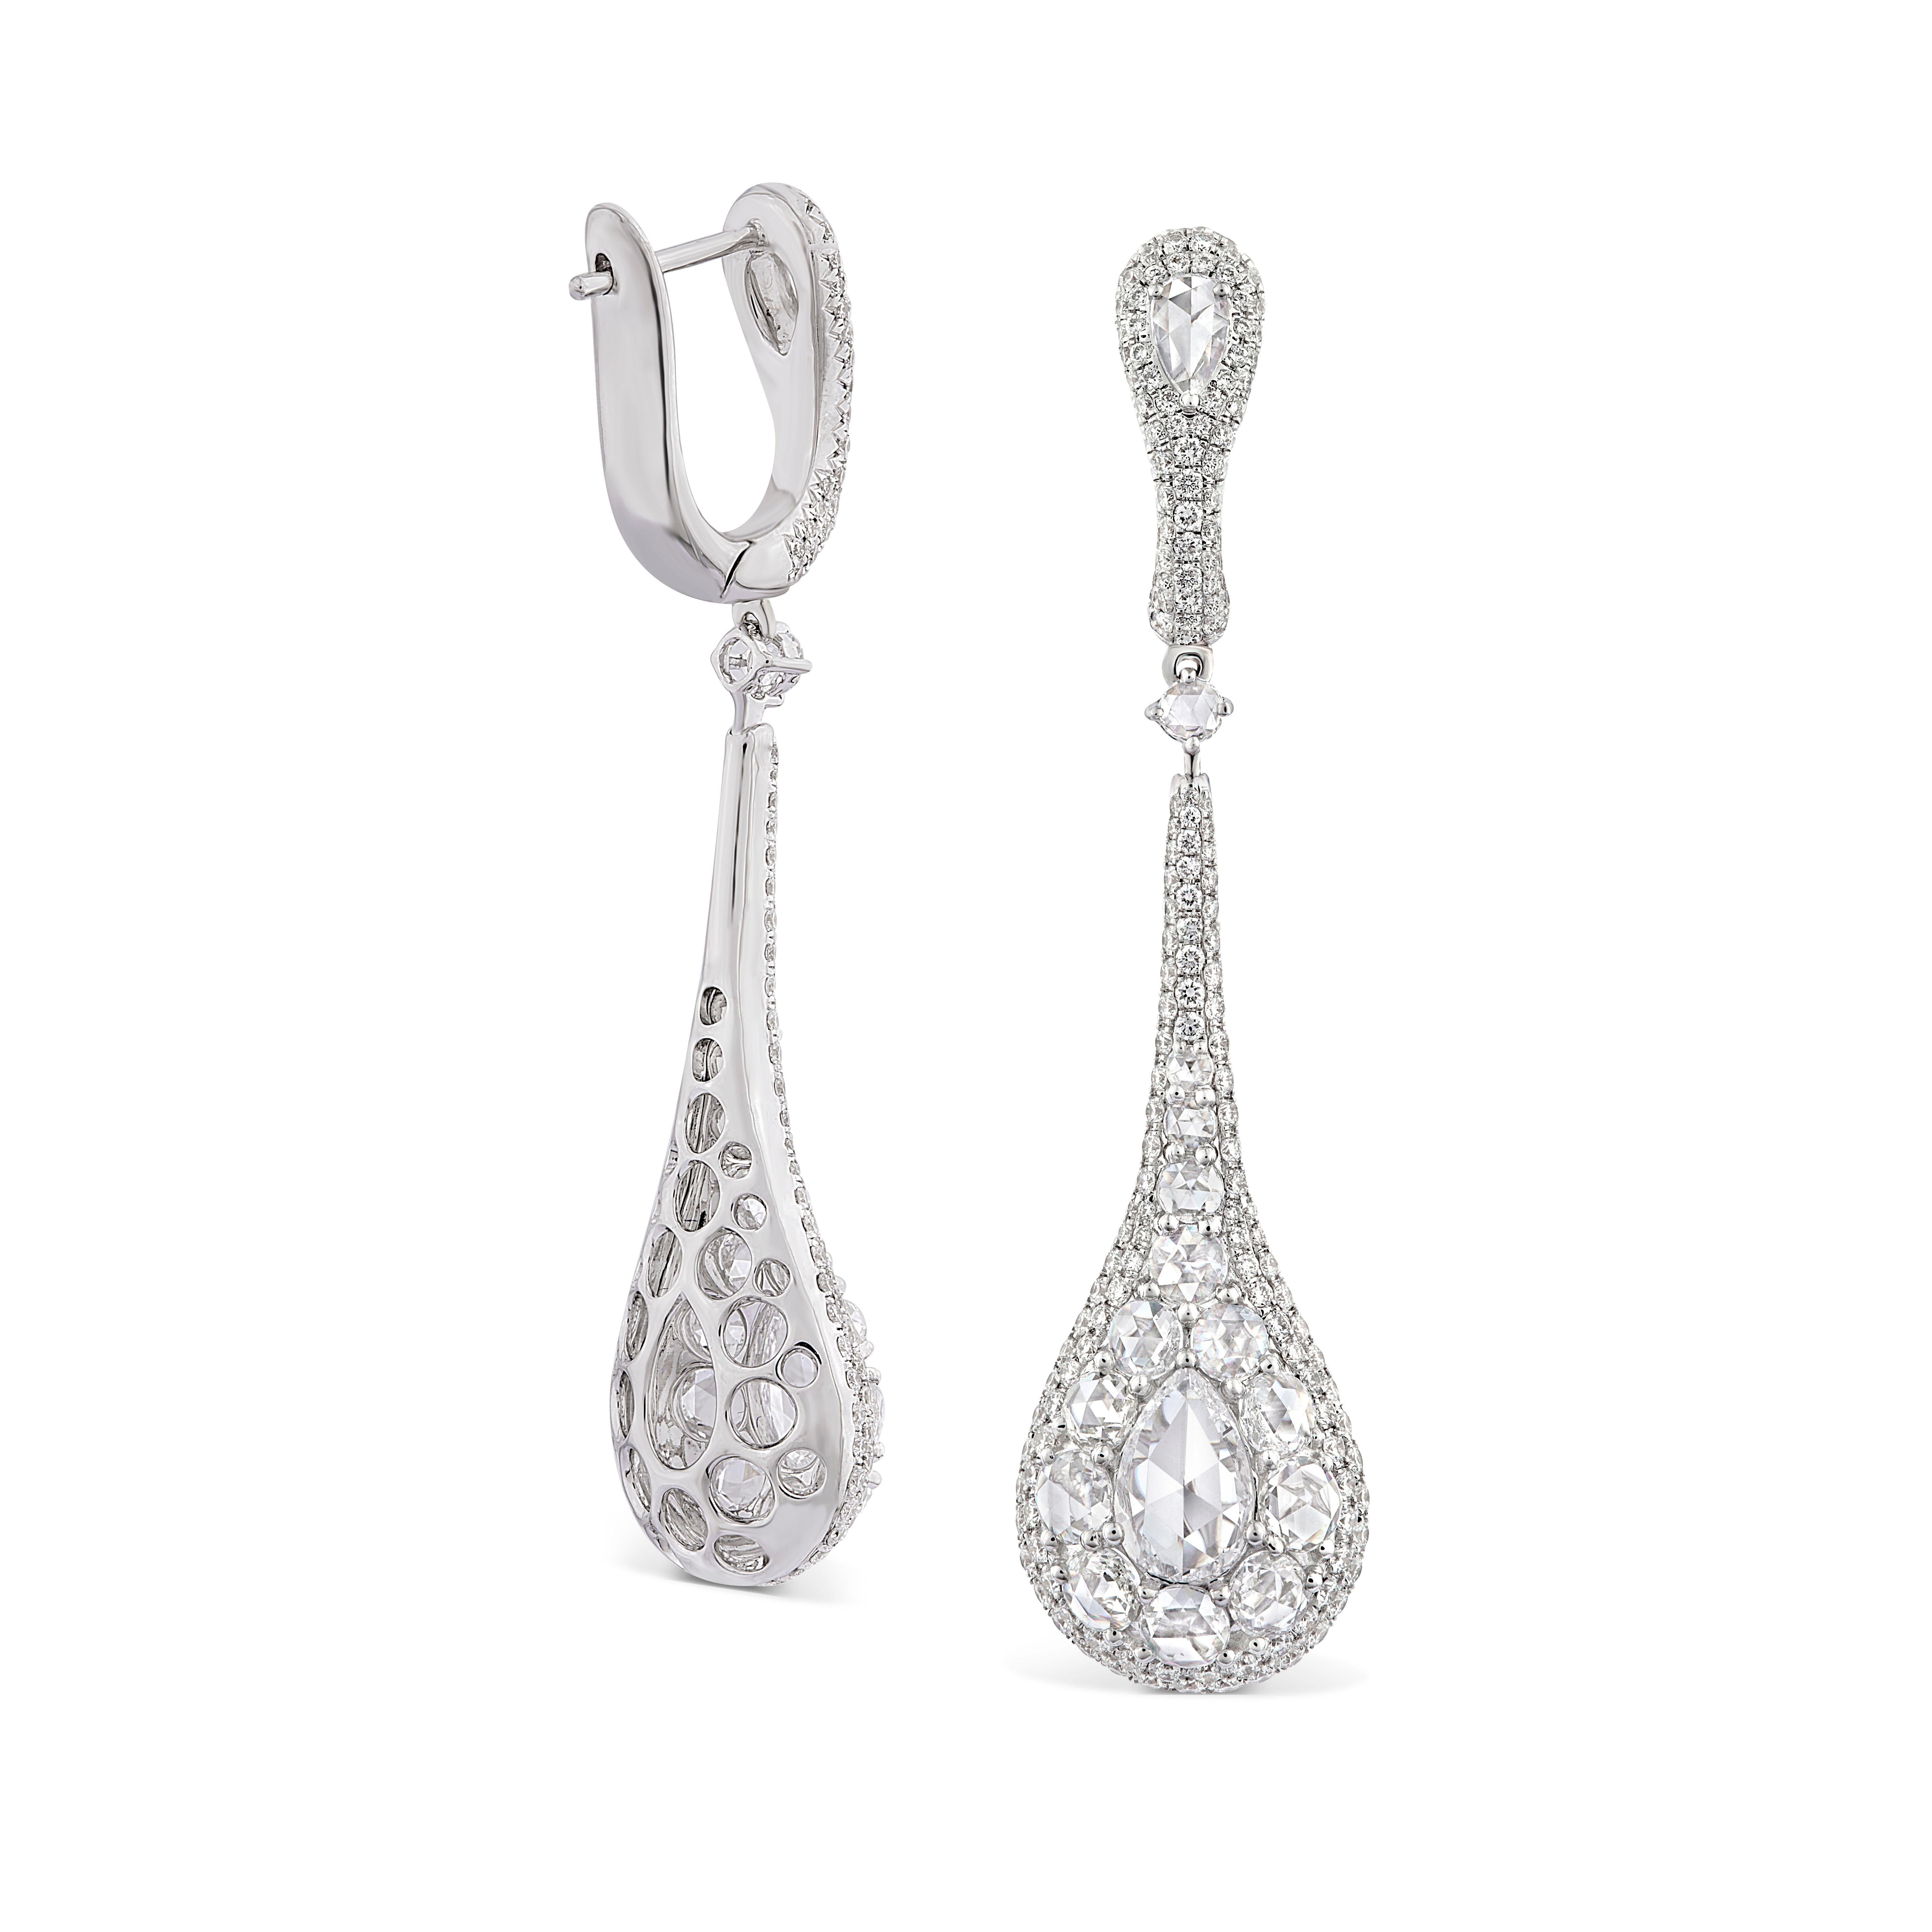 These elegant drop earrings, encrusted with 32 rose-cut diamonds and 336 micro pave set round brilliants, capture the natural symmetry of dewdrops glistening on a winter morning. The central set pear shape diamonds, with a combined weight of